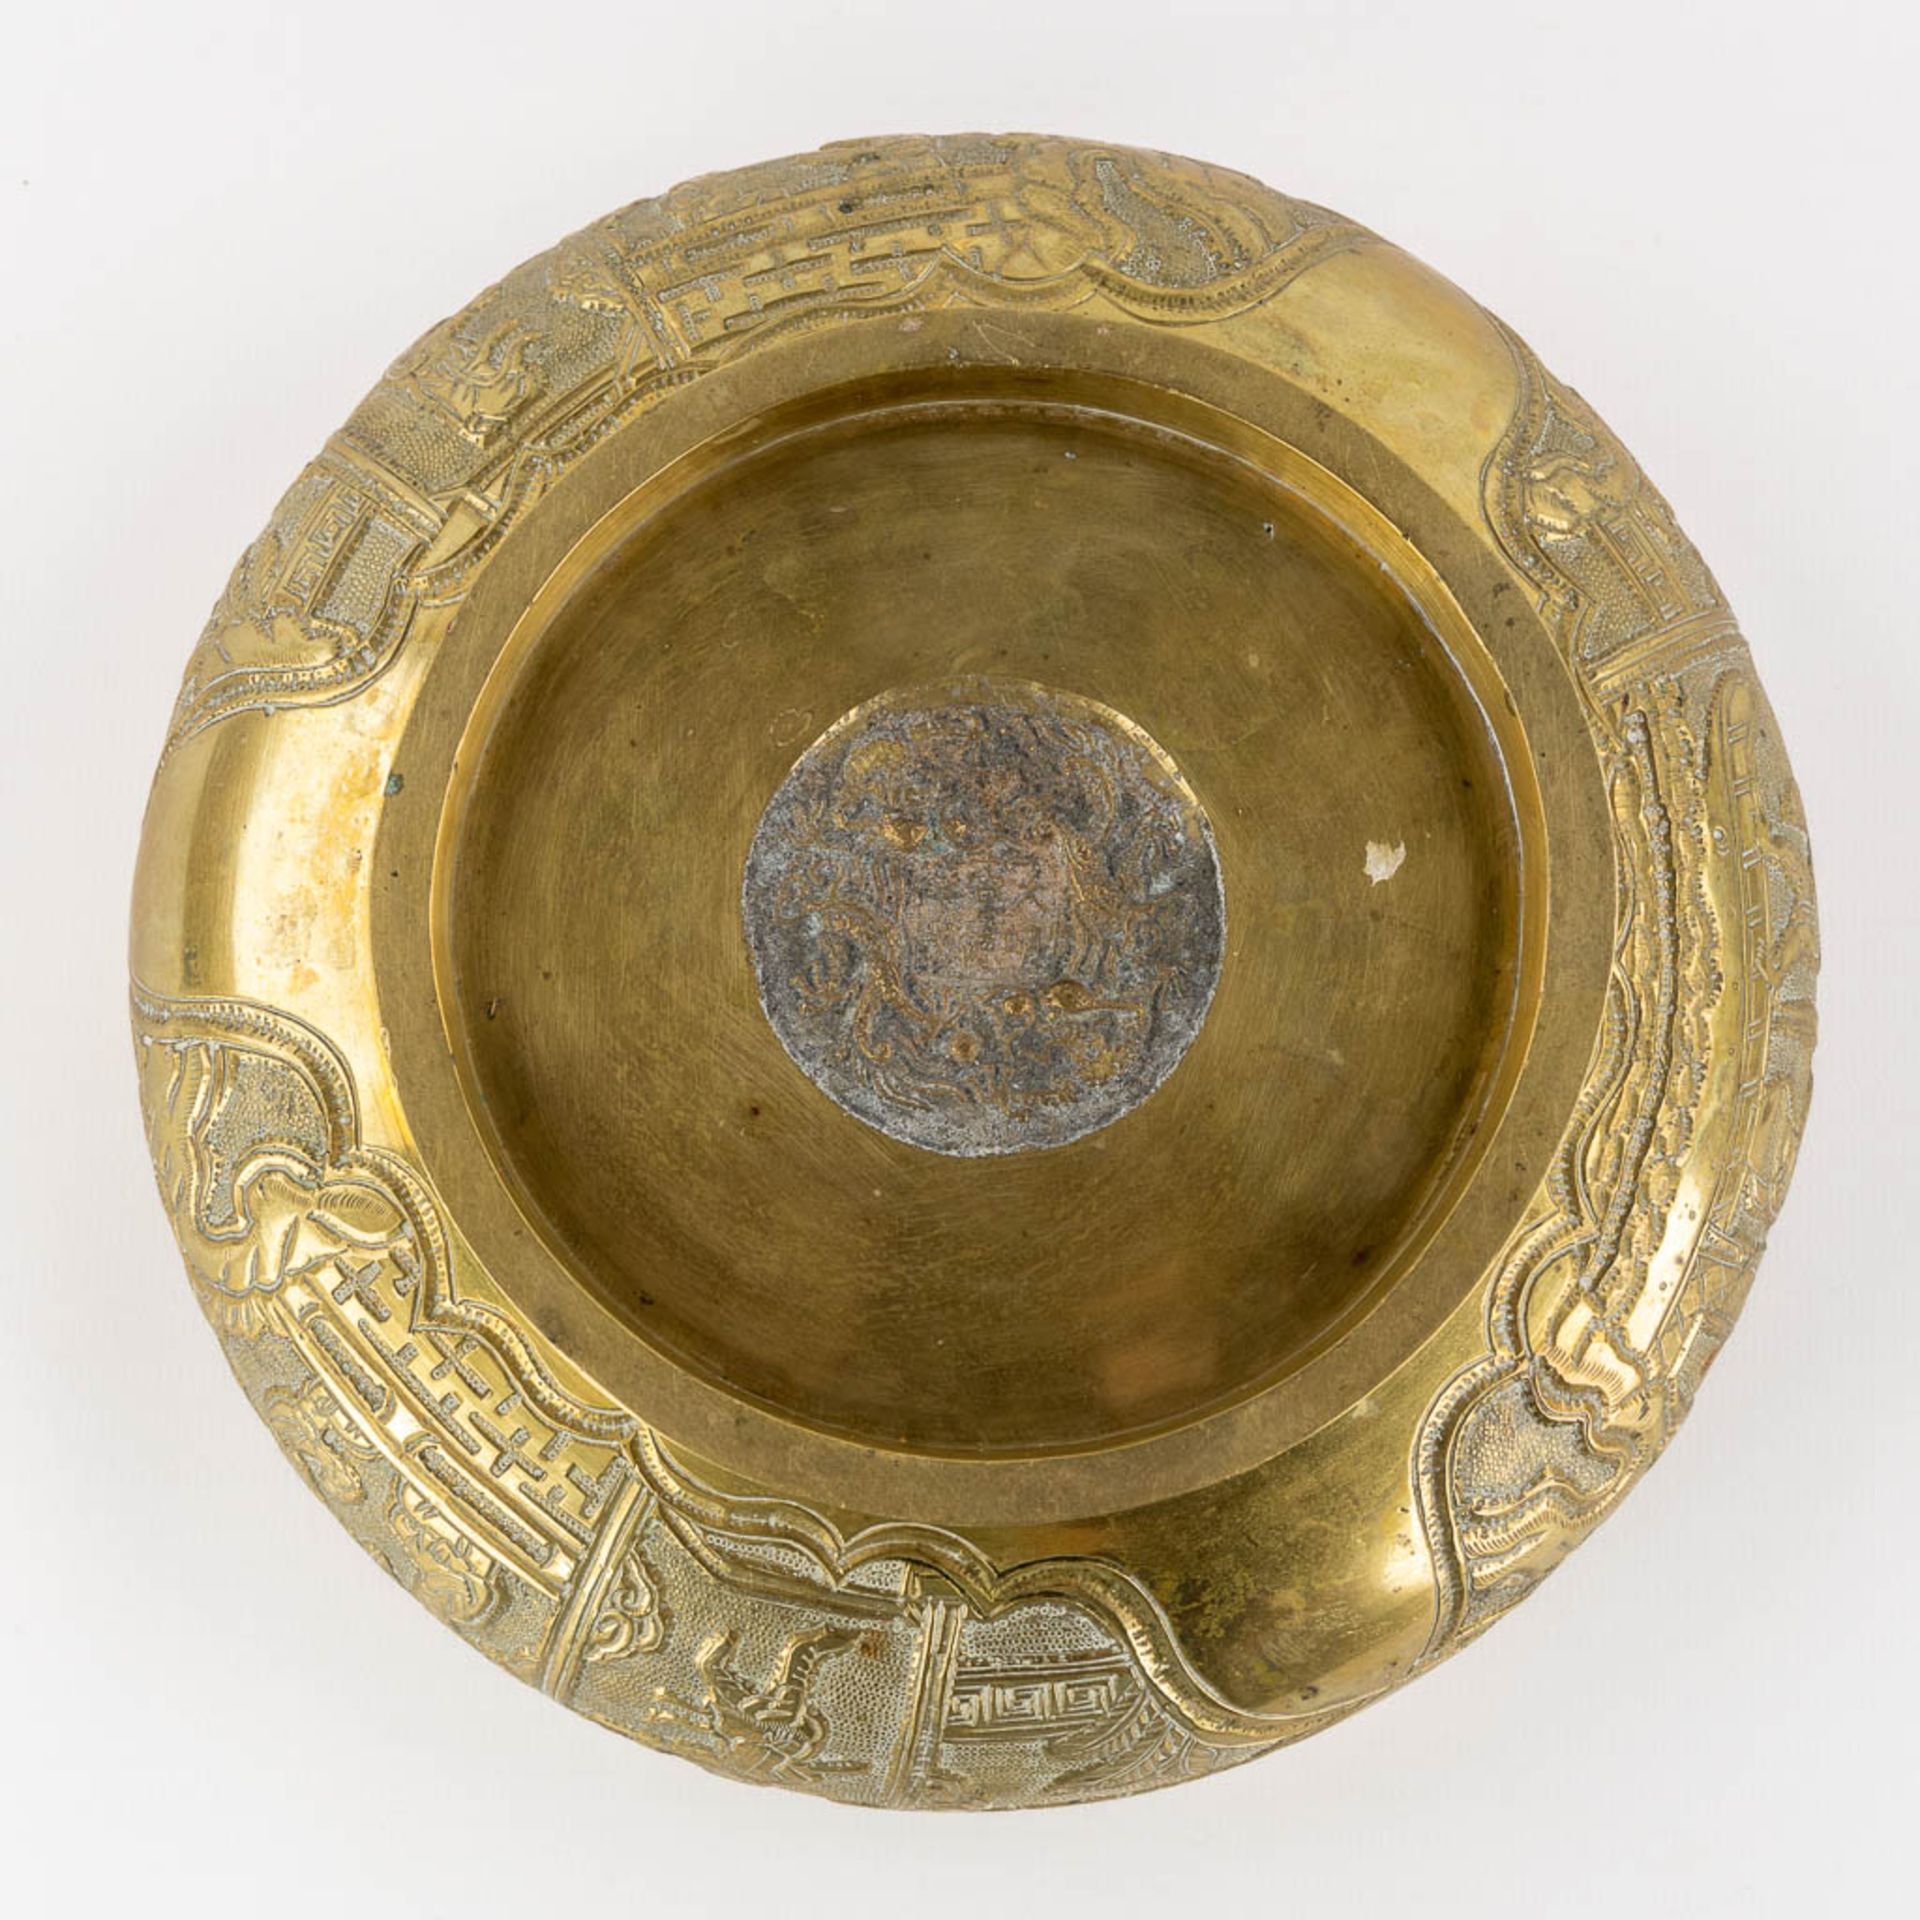 A Chinese bronze insence burner, standing on a wood base. (H:6,5 x D:22 cm) - Image 9 of 13